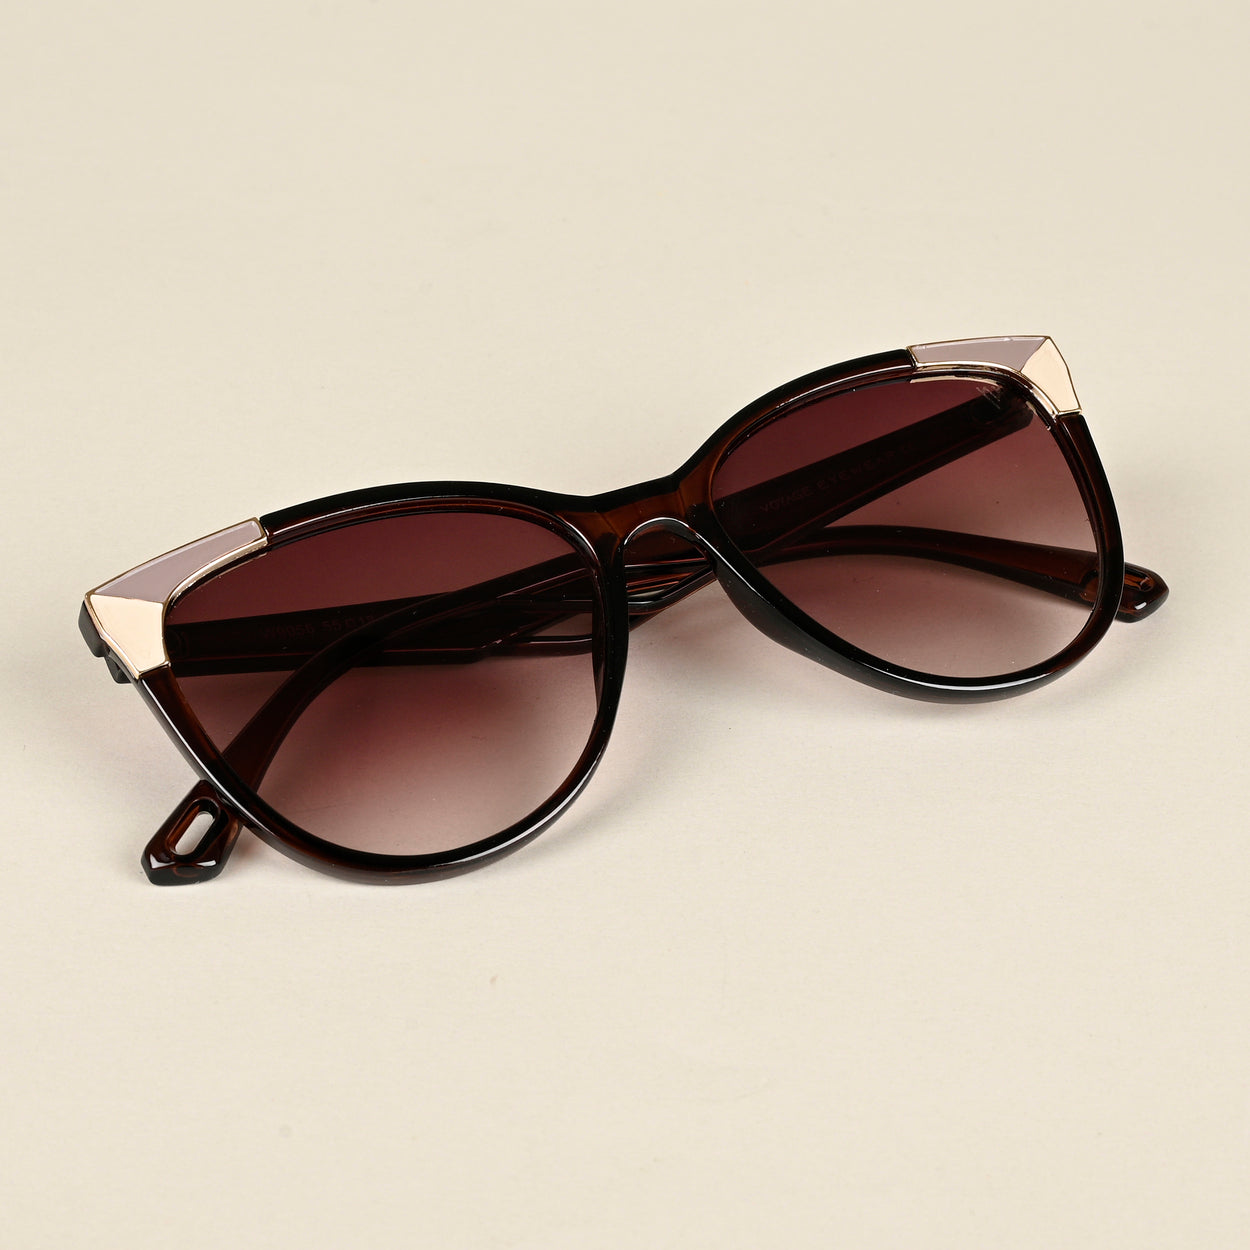 Voyage Brown Cateye Sunglasses for Women - MG4229